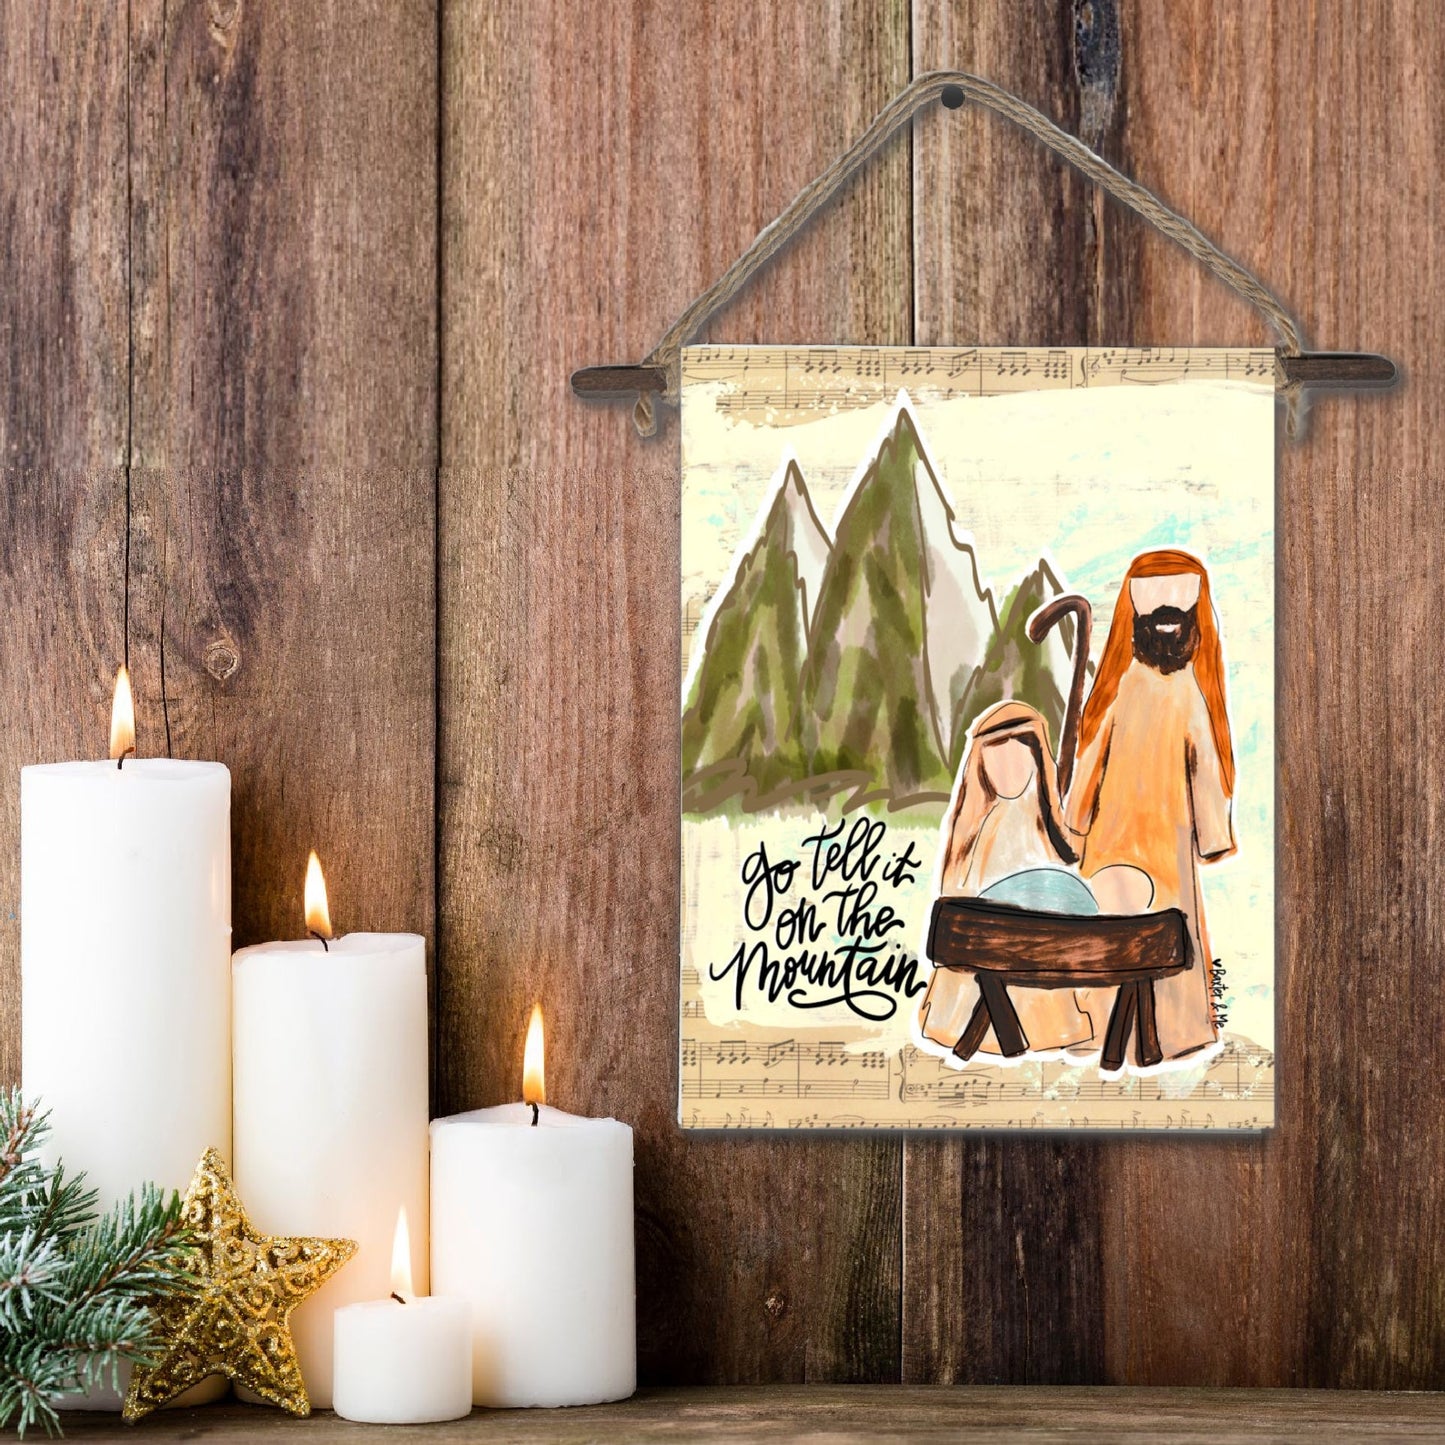 Go Tell it on the Mountain Nativity Mini Wall Hanging